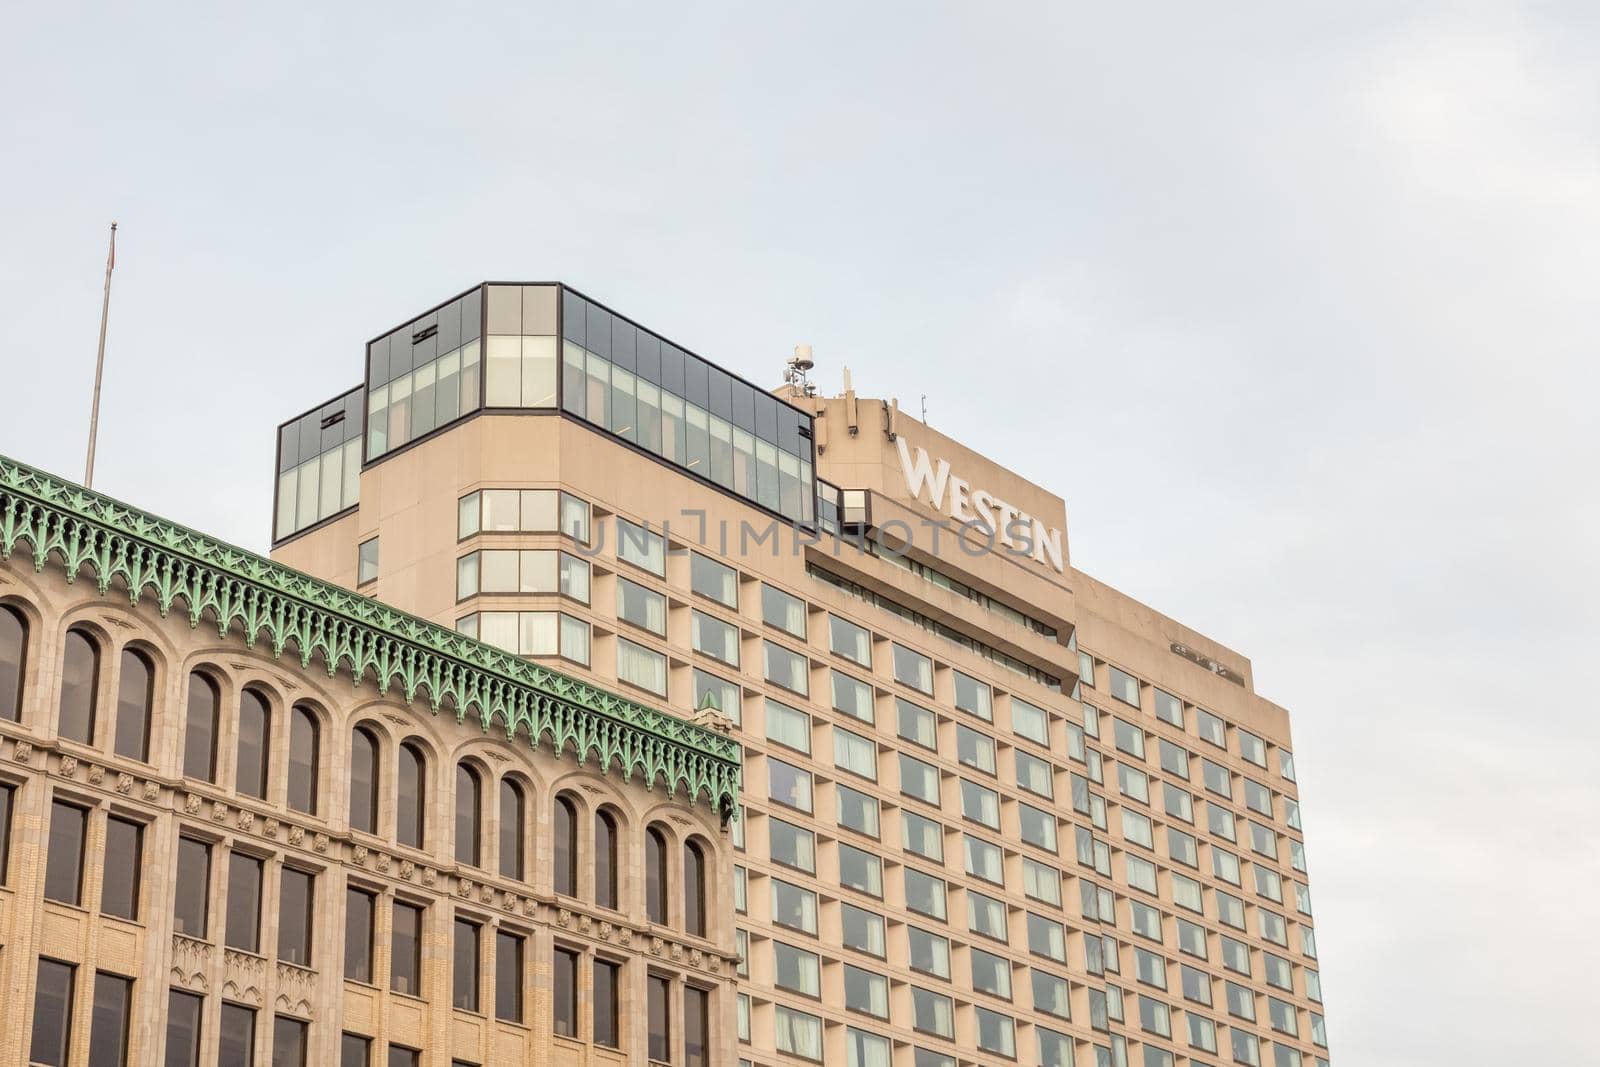 The Westin hotel in the downtown area of the Canadian capital near popular CF Rideau Centre and next to Parliament Hill Ottawa, Ontario Canada - August 26, 2020 by JuliaDorian